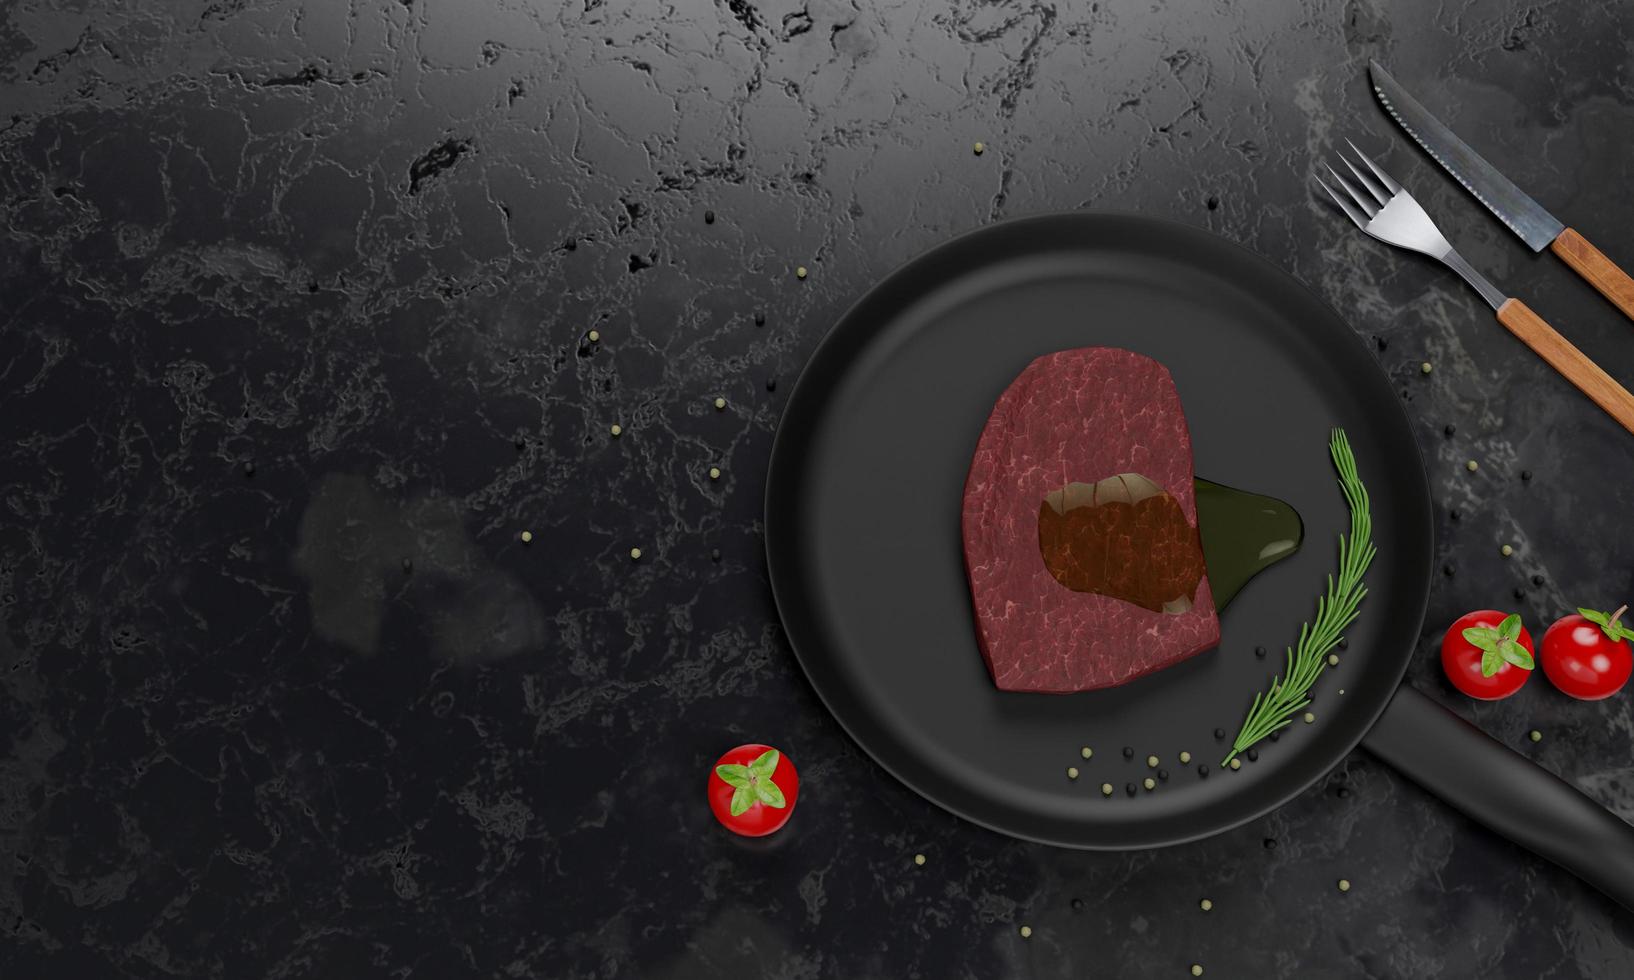 Fresh beef for steaks With olive oil on top Place on a Teflon pan. Seasoning of white pepper and black pepper, decorated with cherry tomatoes. Black Marble Table There is a knife and fork photo